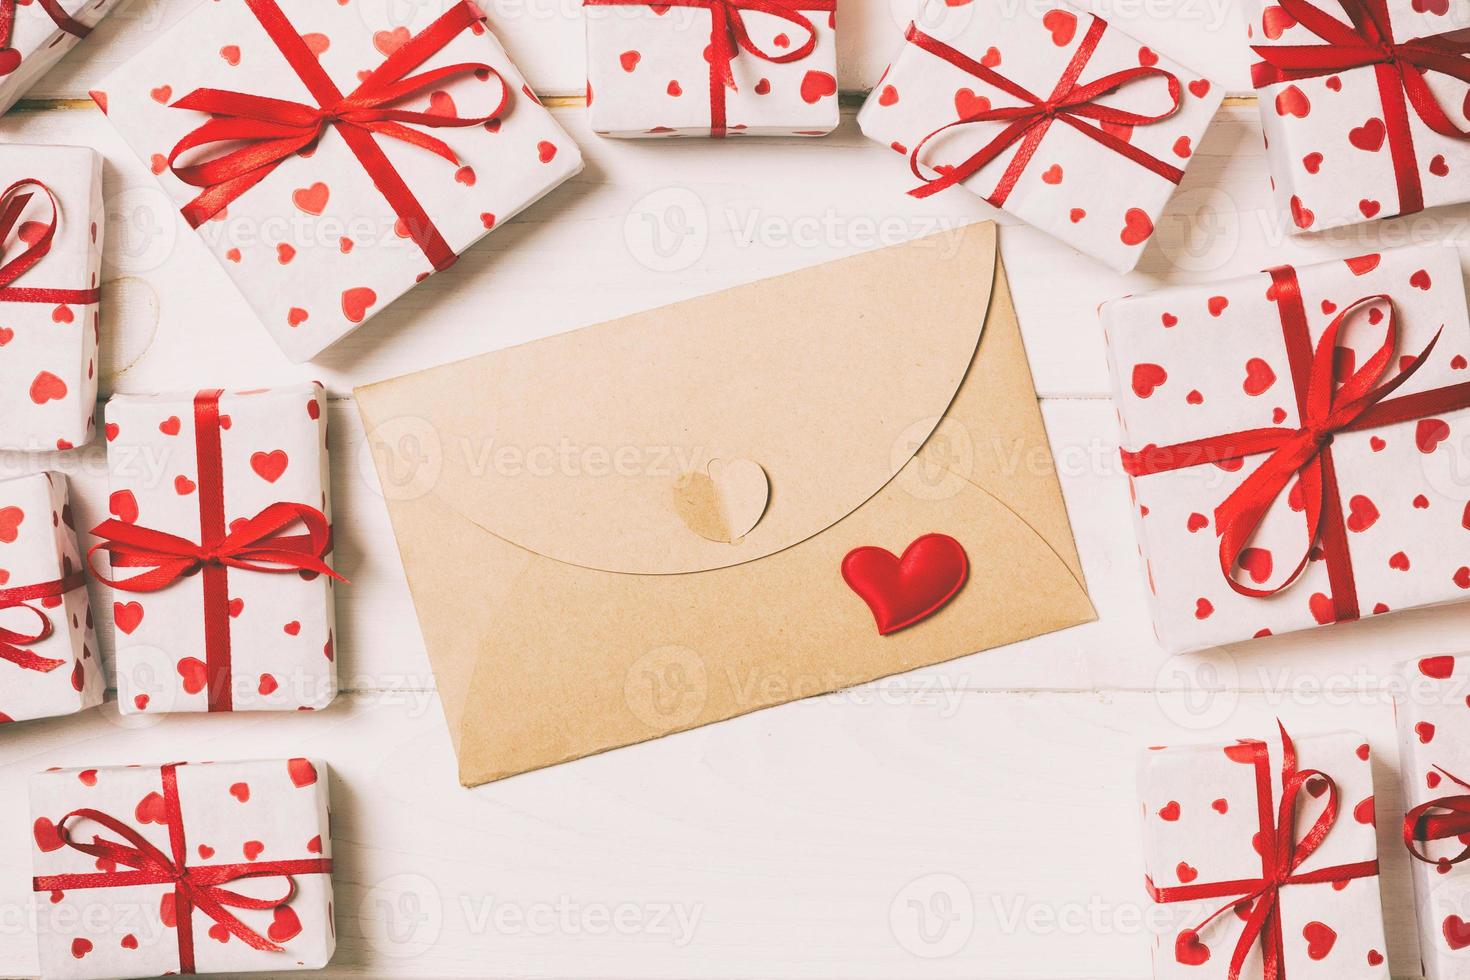 Envelope Mail with Red Heart and gift box over Wooden vintage toned Background. Valentine Day Card, Love or Wedding Greeting Concept design photo